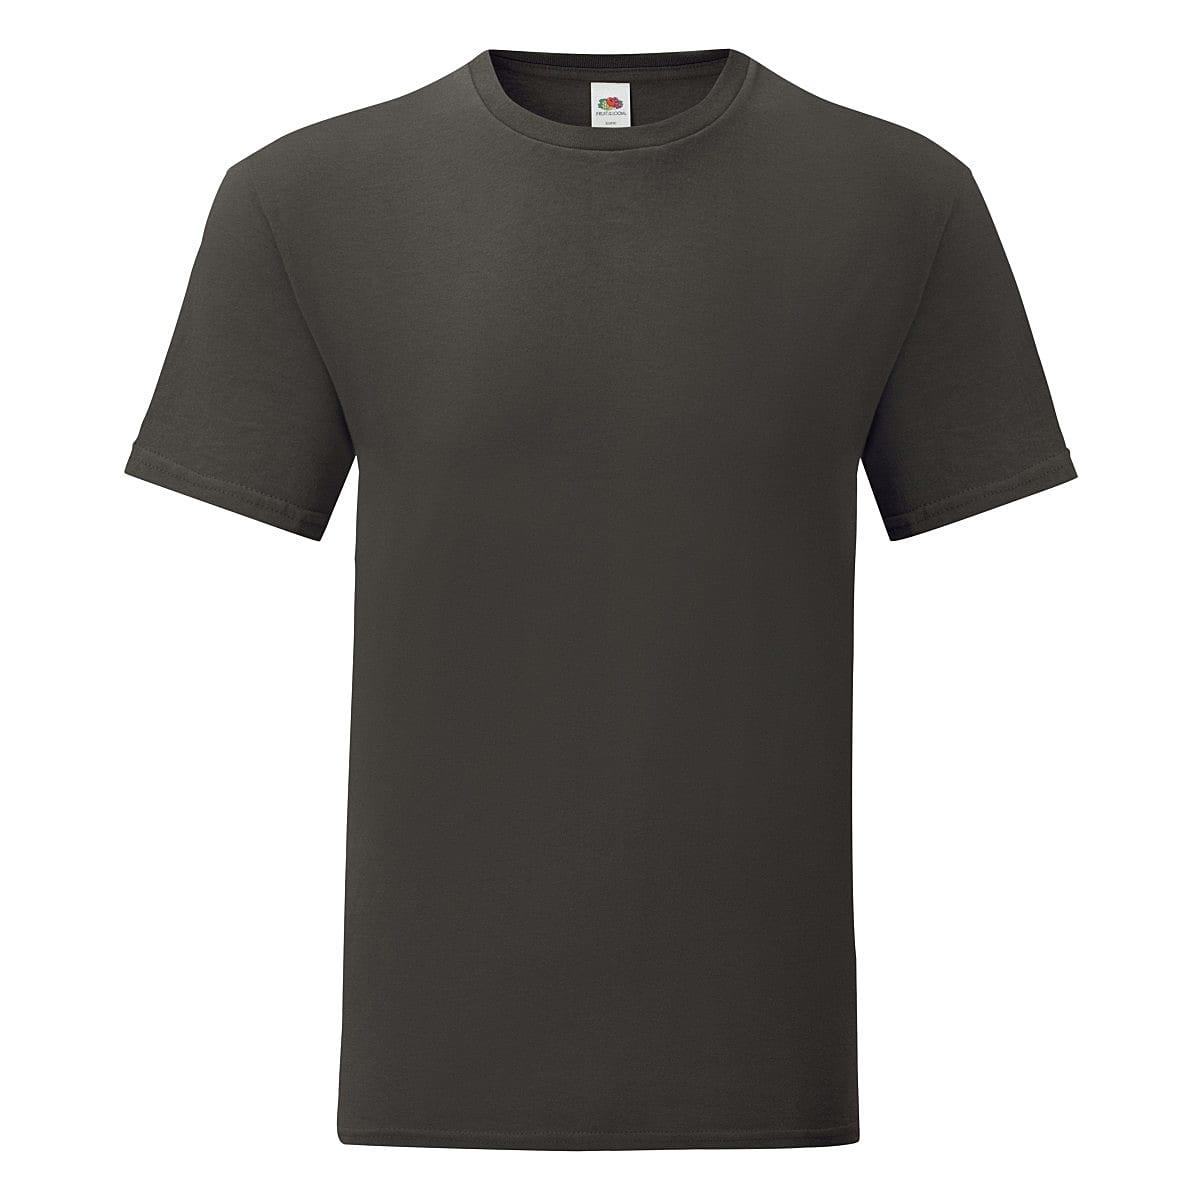 Fruit Of The Loom Mens Iconic T-Shirt in Light Graphite (Product Code: 61430)